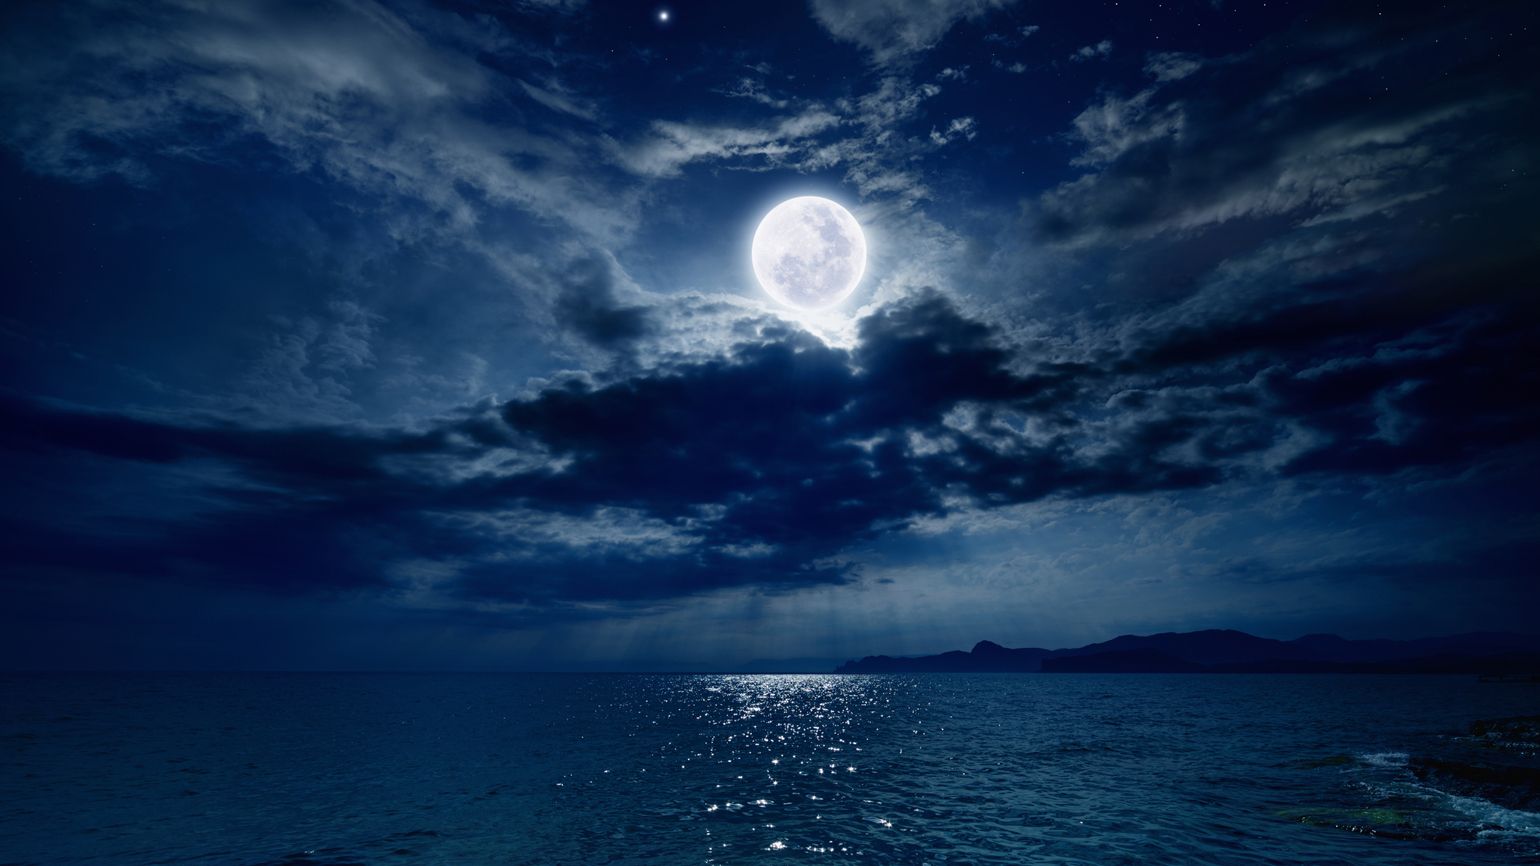 The night sky against the ocean with a full moon shining through dark clouds.